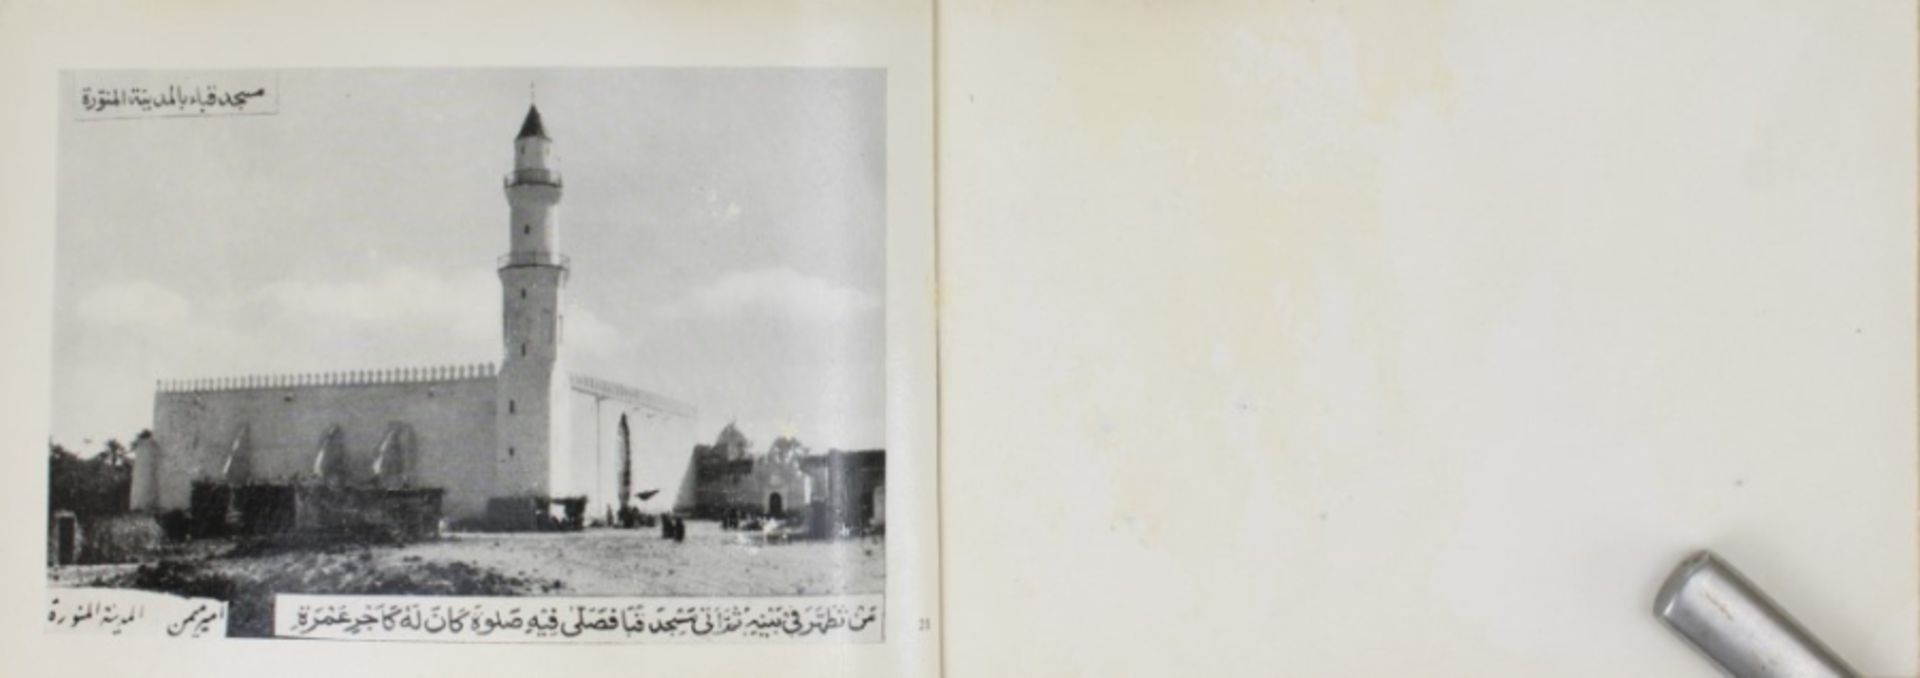 1930 Album with photographs of Mecca - Image 20 of 24